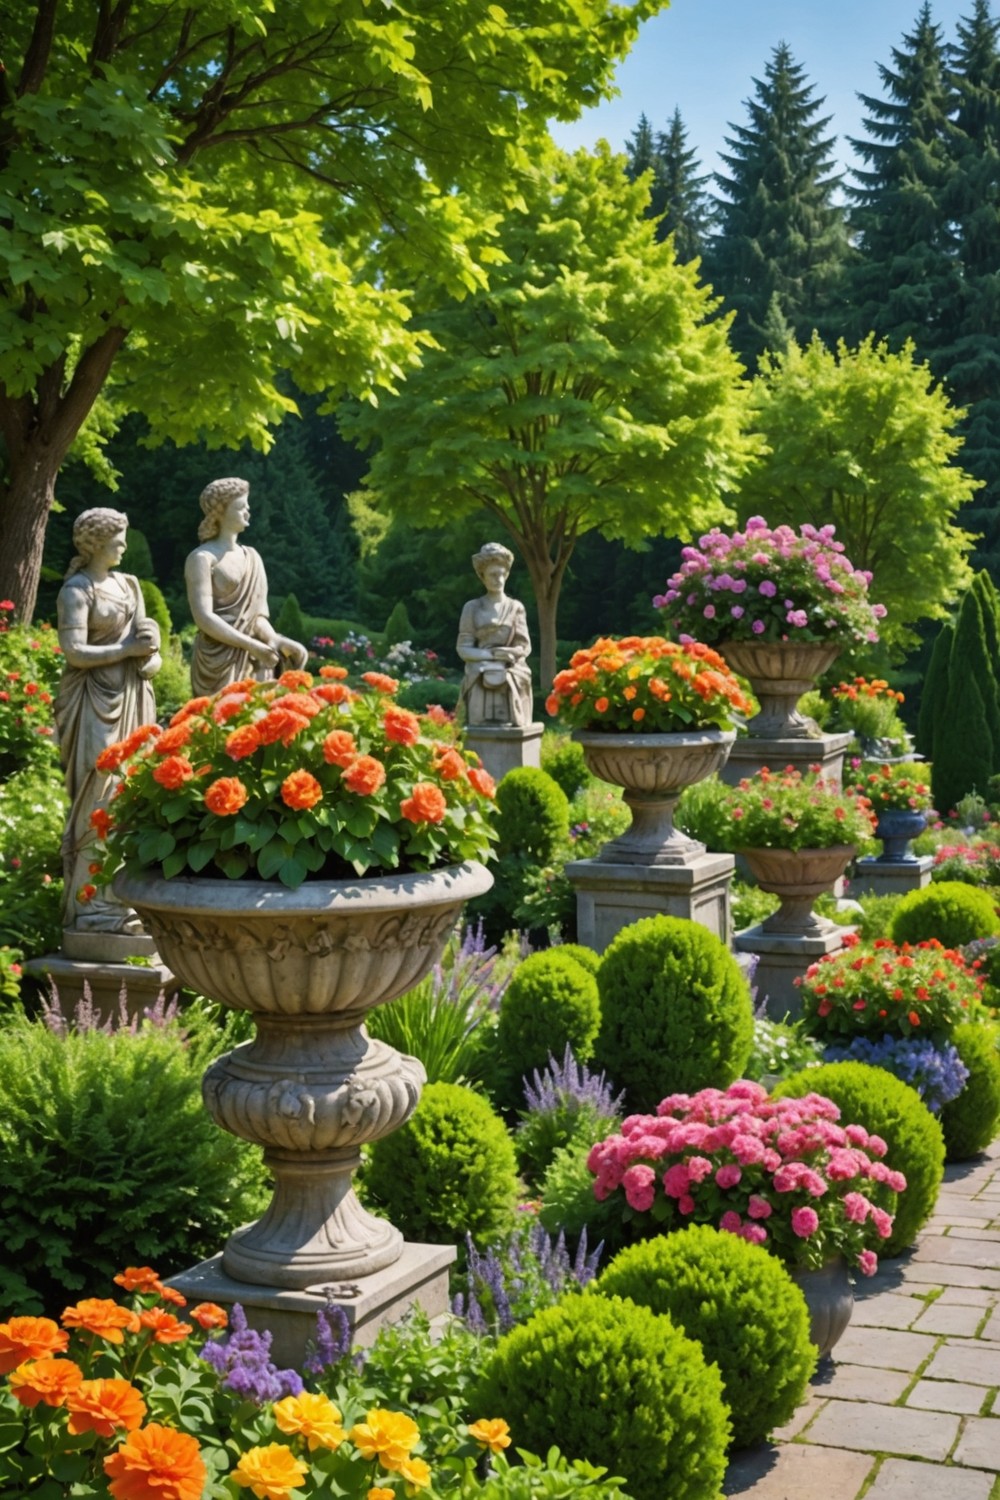 Hillside Planters and Container Gardens